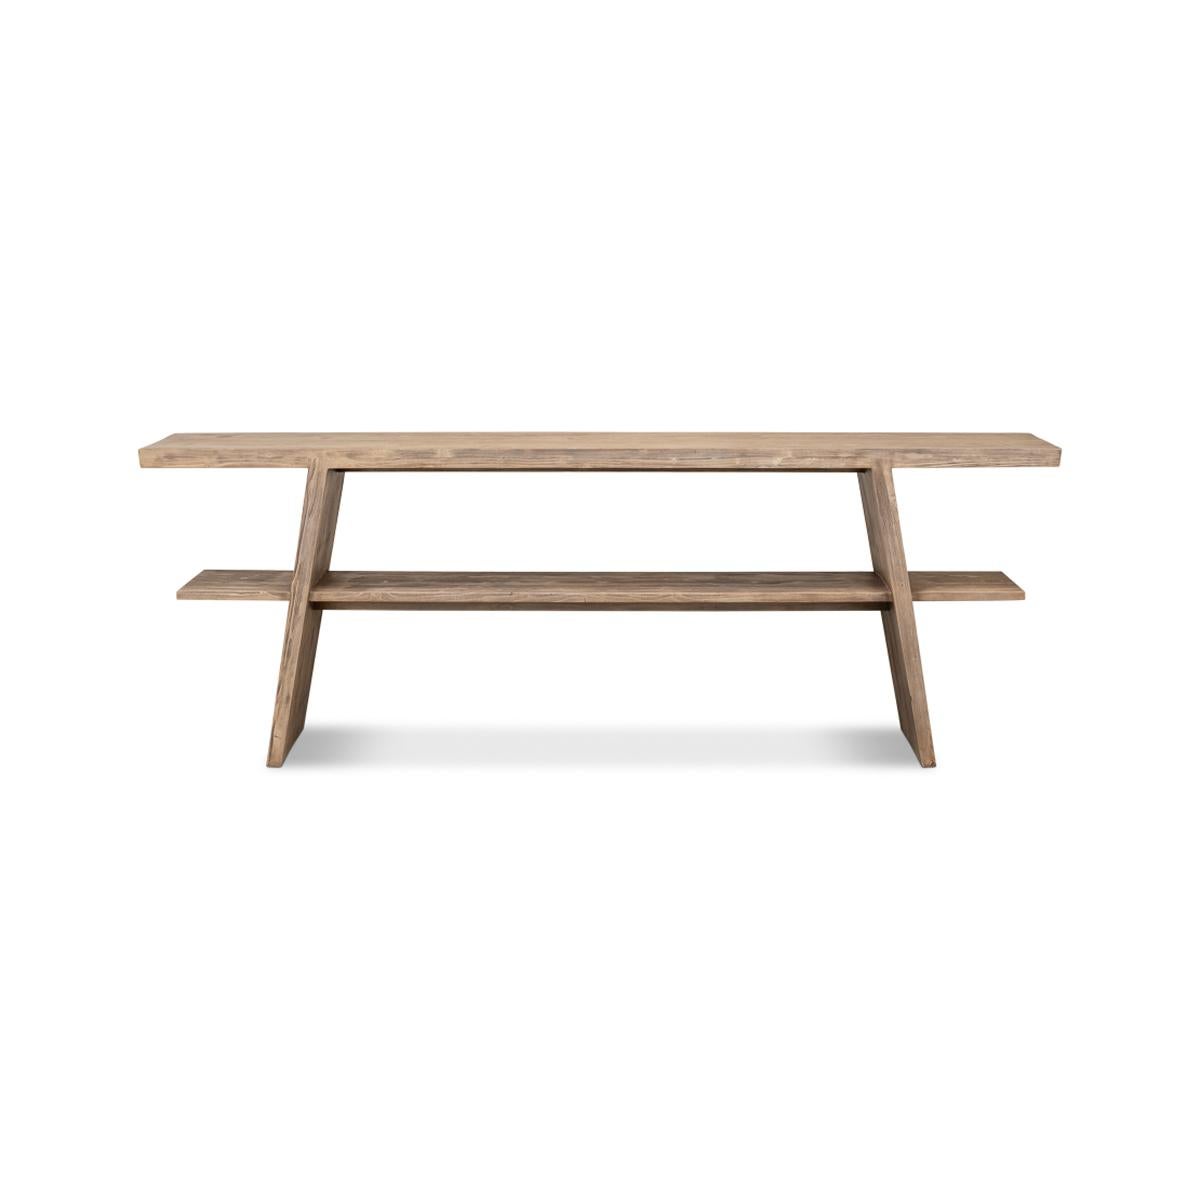 The Pine vineyards console table is a breathtaking piece of furniture that will instantly elevate your space. With its grand scale and unique geometric design, this console table is a true statement piece. The flaky pine finish adds a touch of